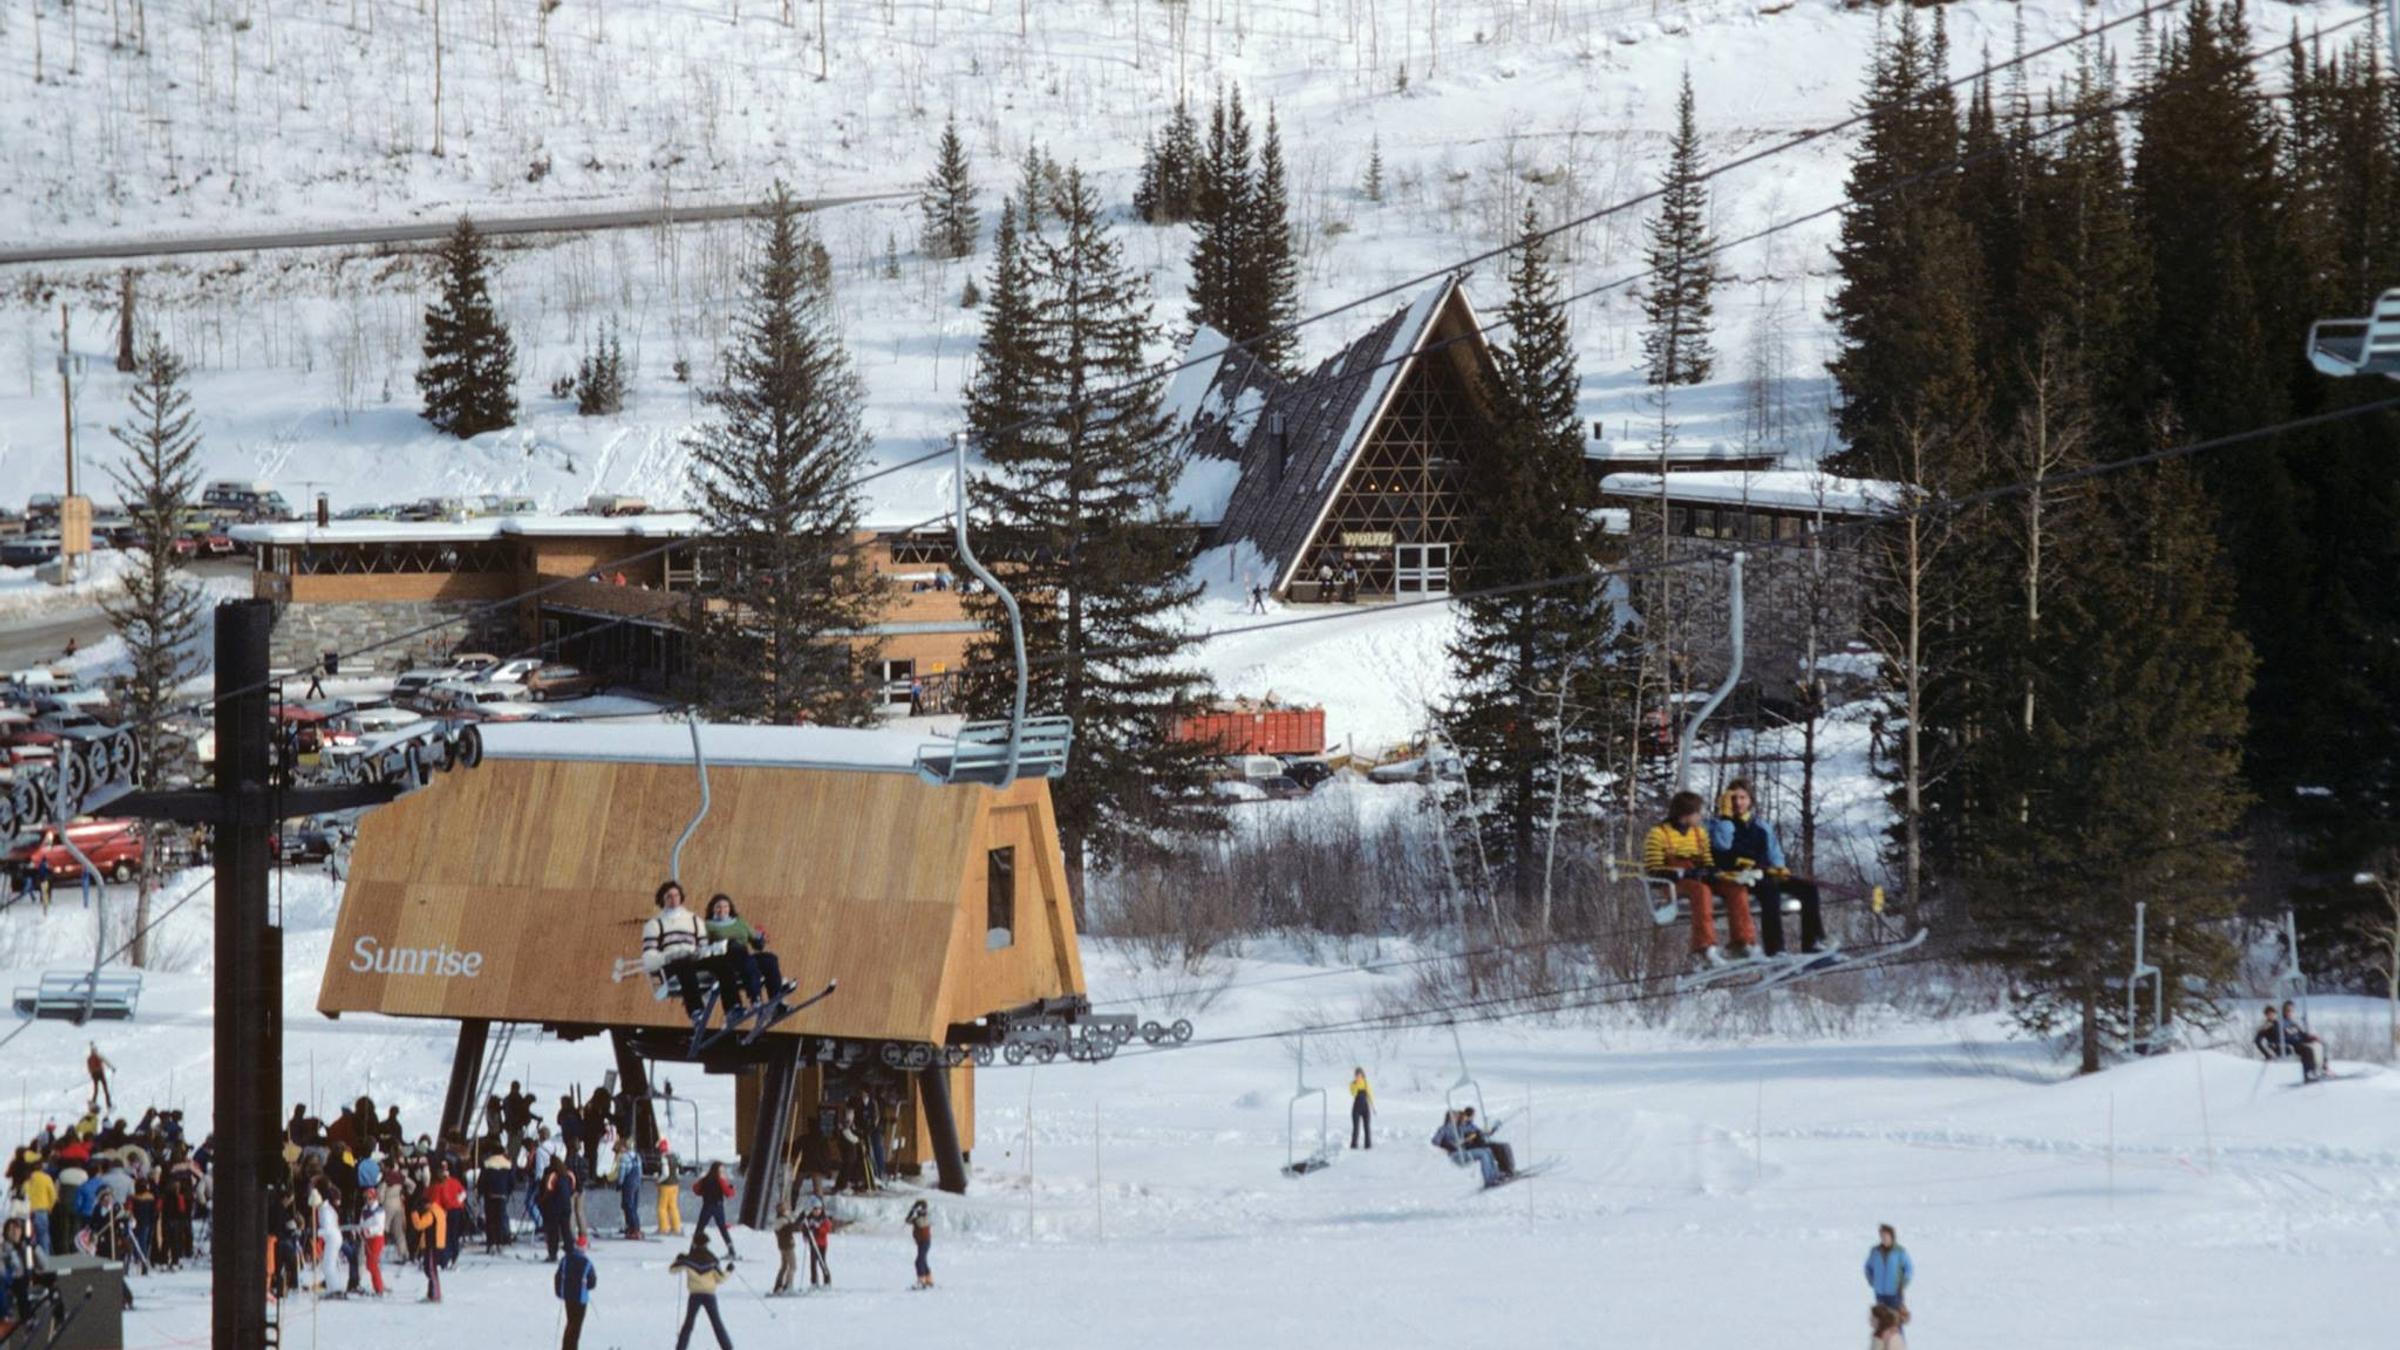 Sunrise Chairlifts in the 1970s